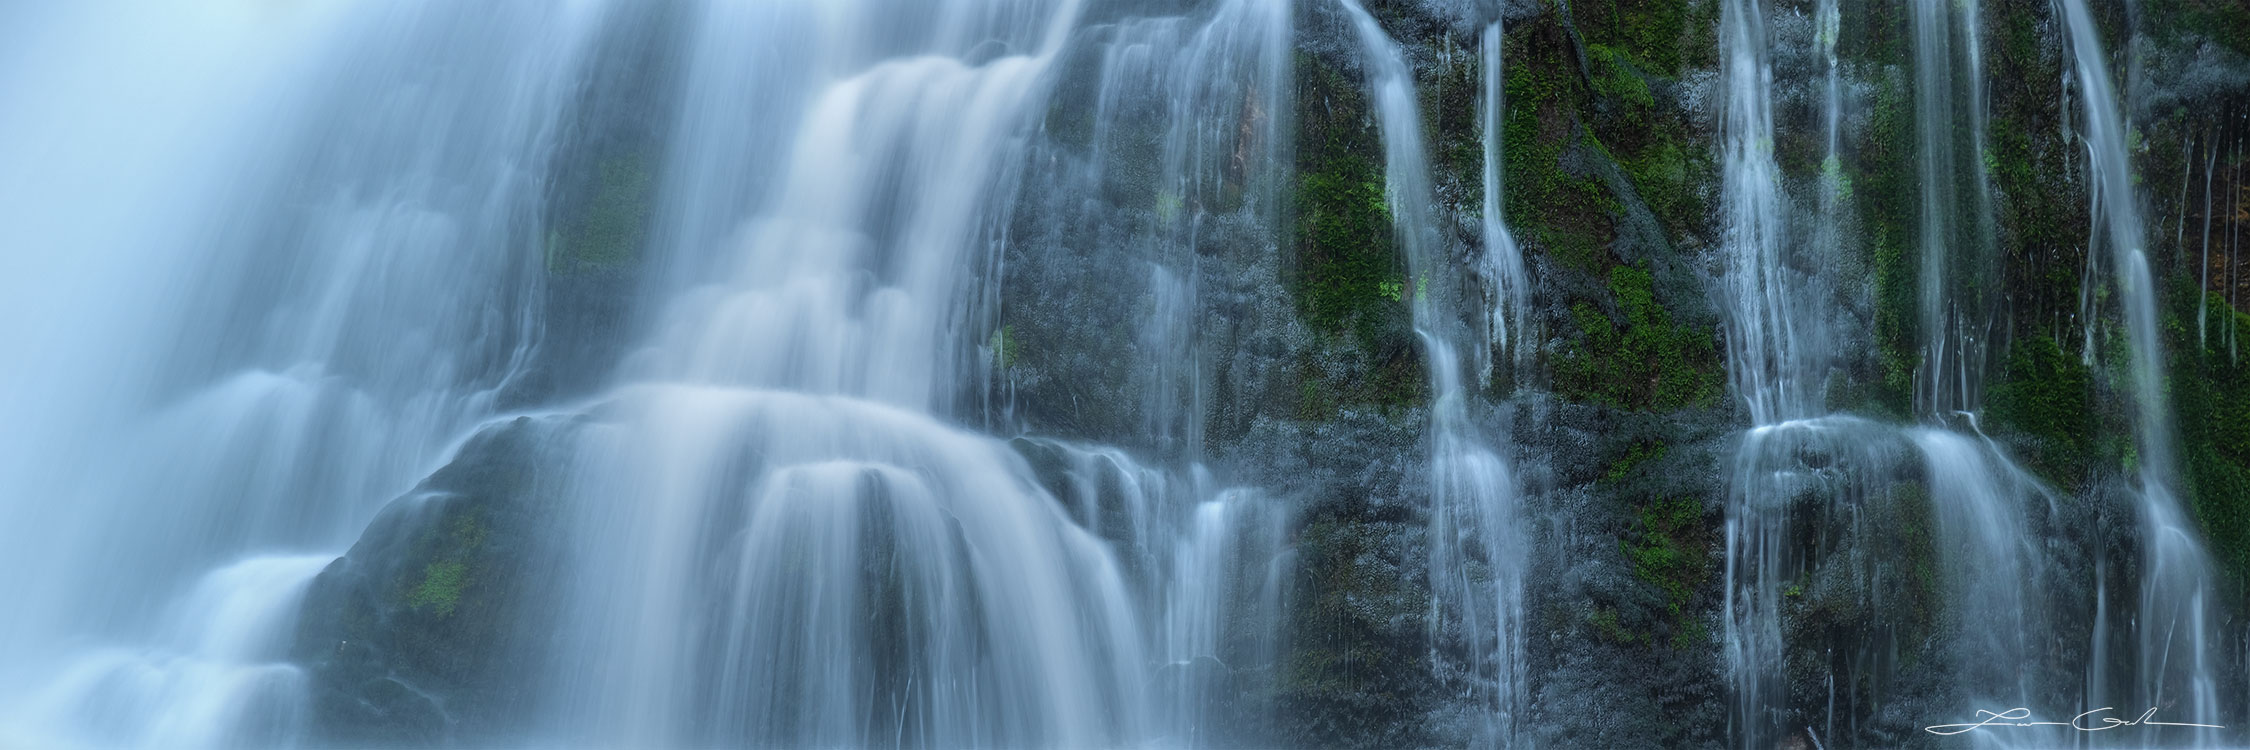 A close up of a cascading waterfall with gentle silky water from the slow motion shot - Gintchin Fine Art